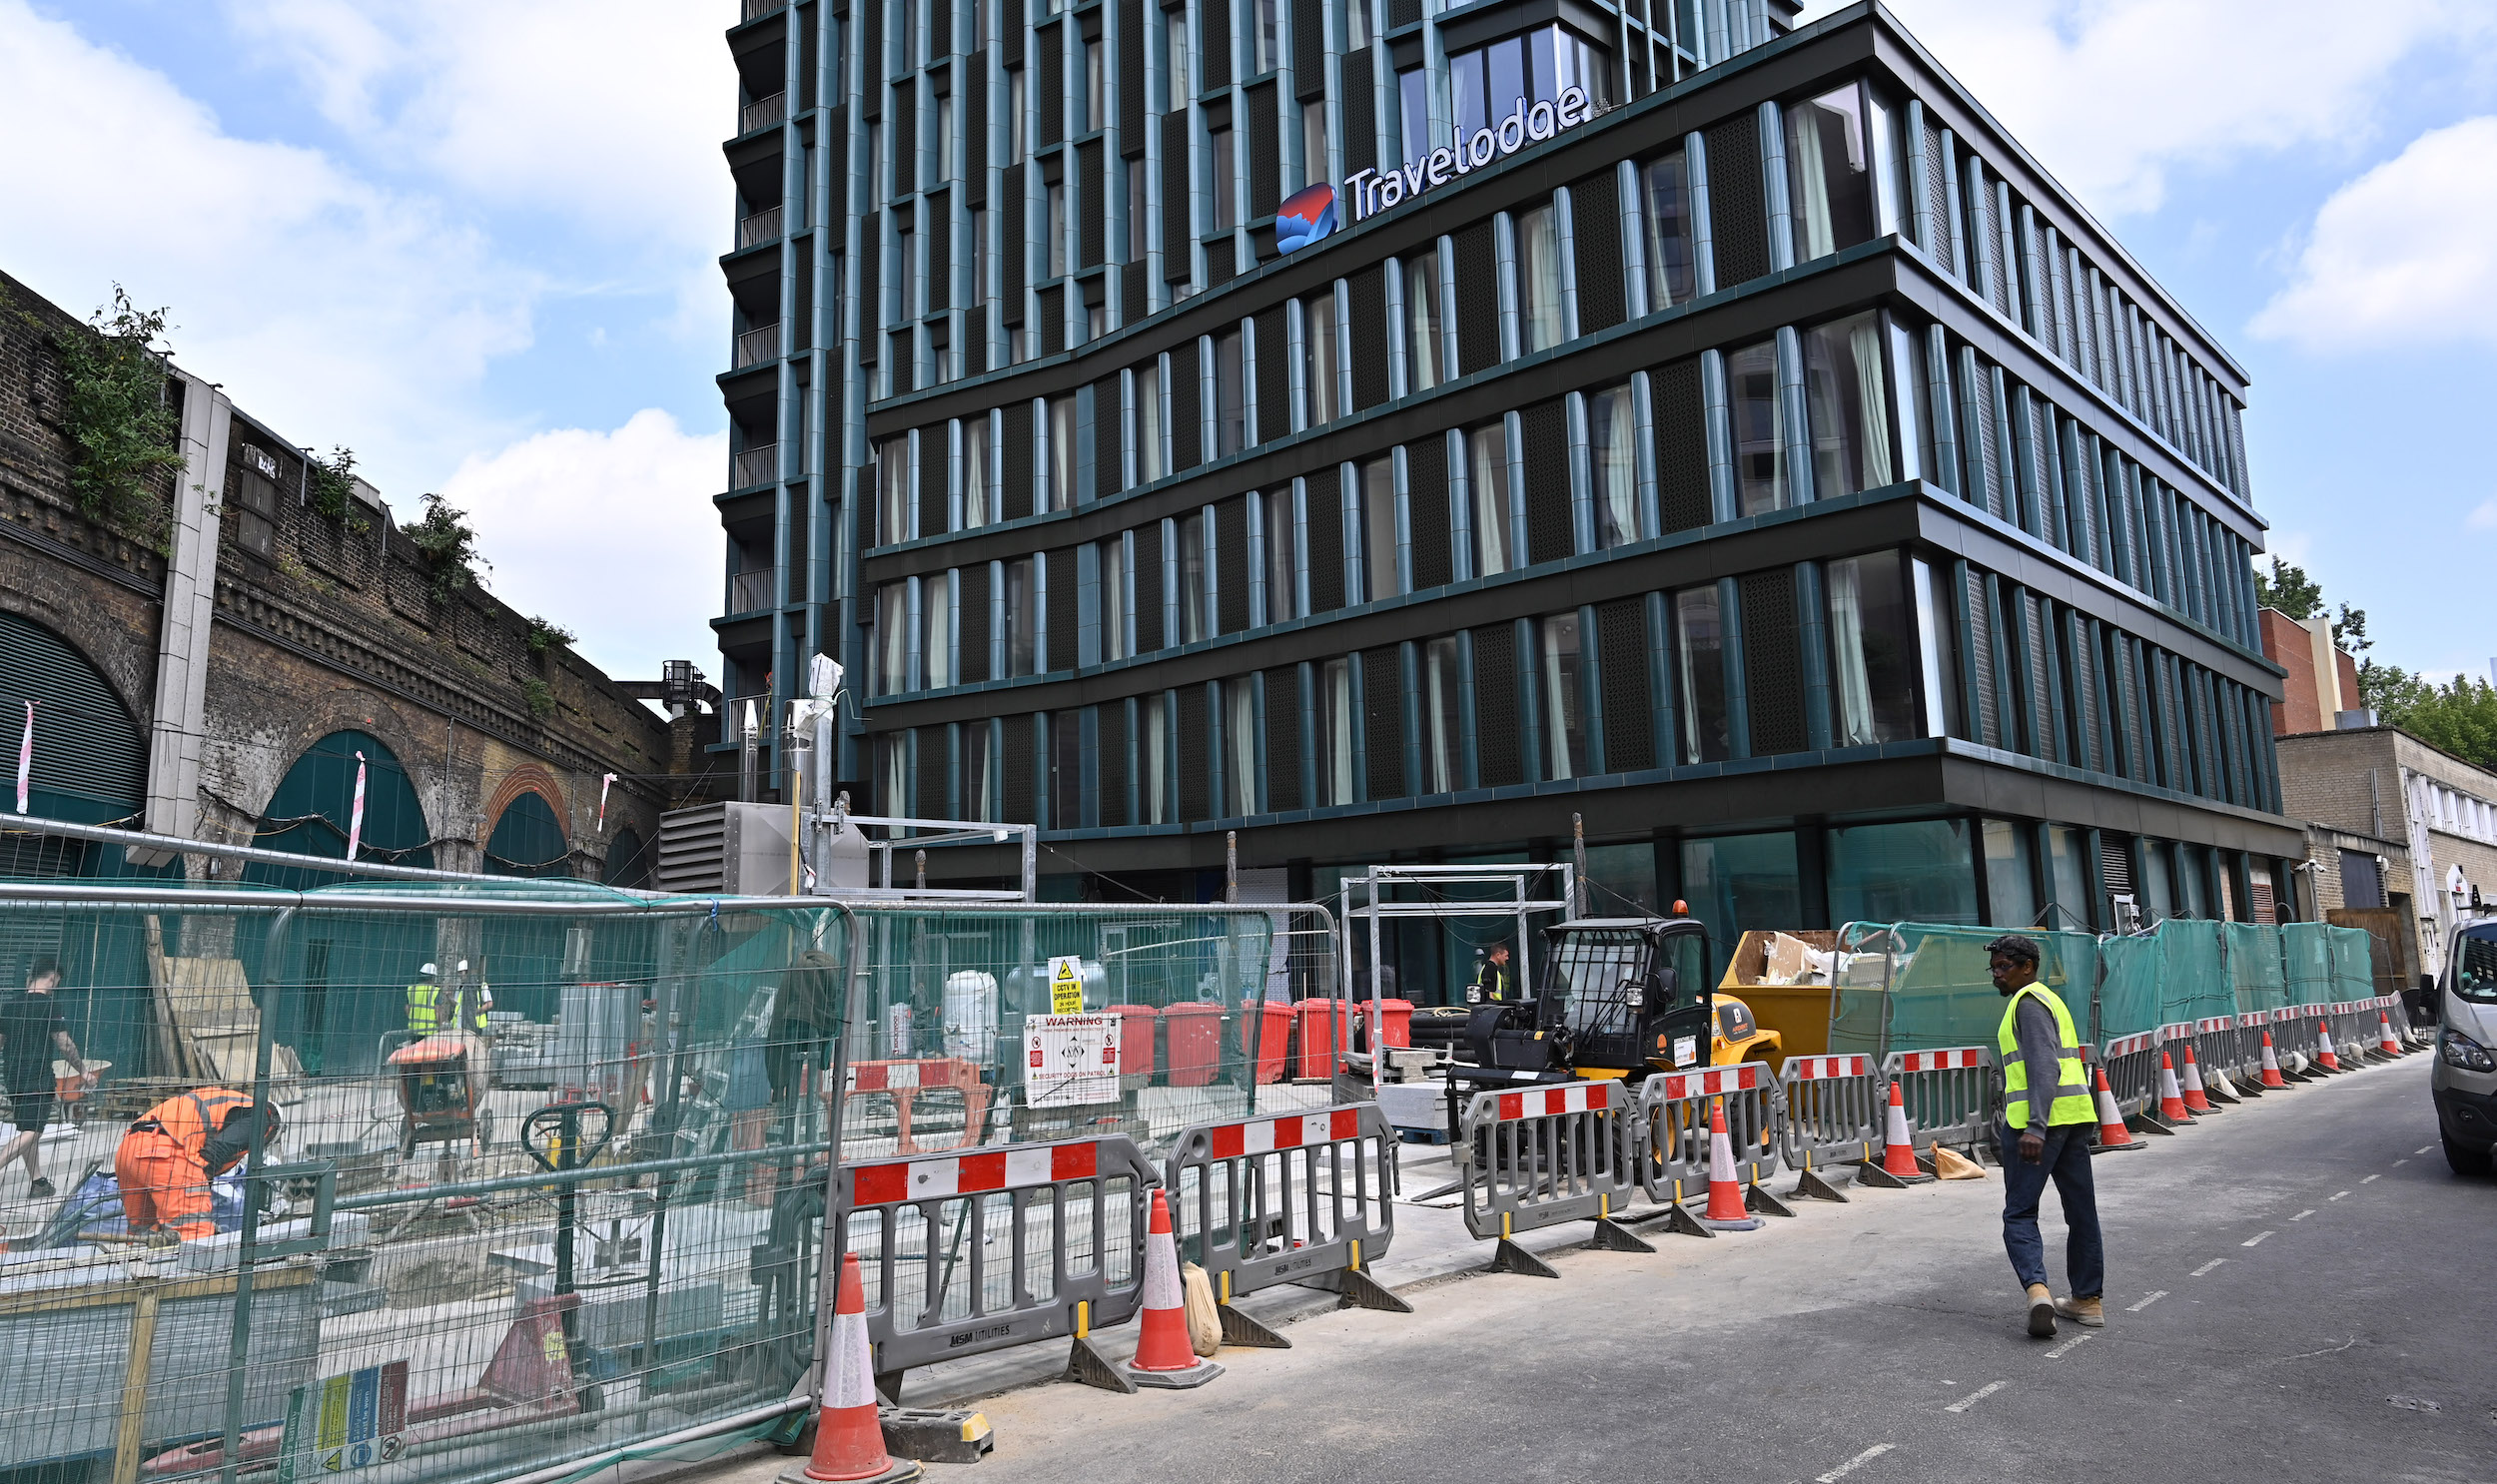 London Elephant and Castle - Mixed-use tower with residential - Travelodge  Property Development